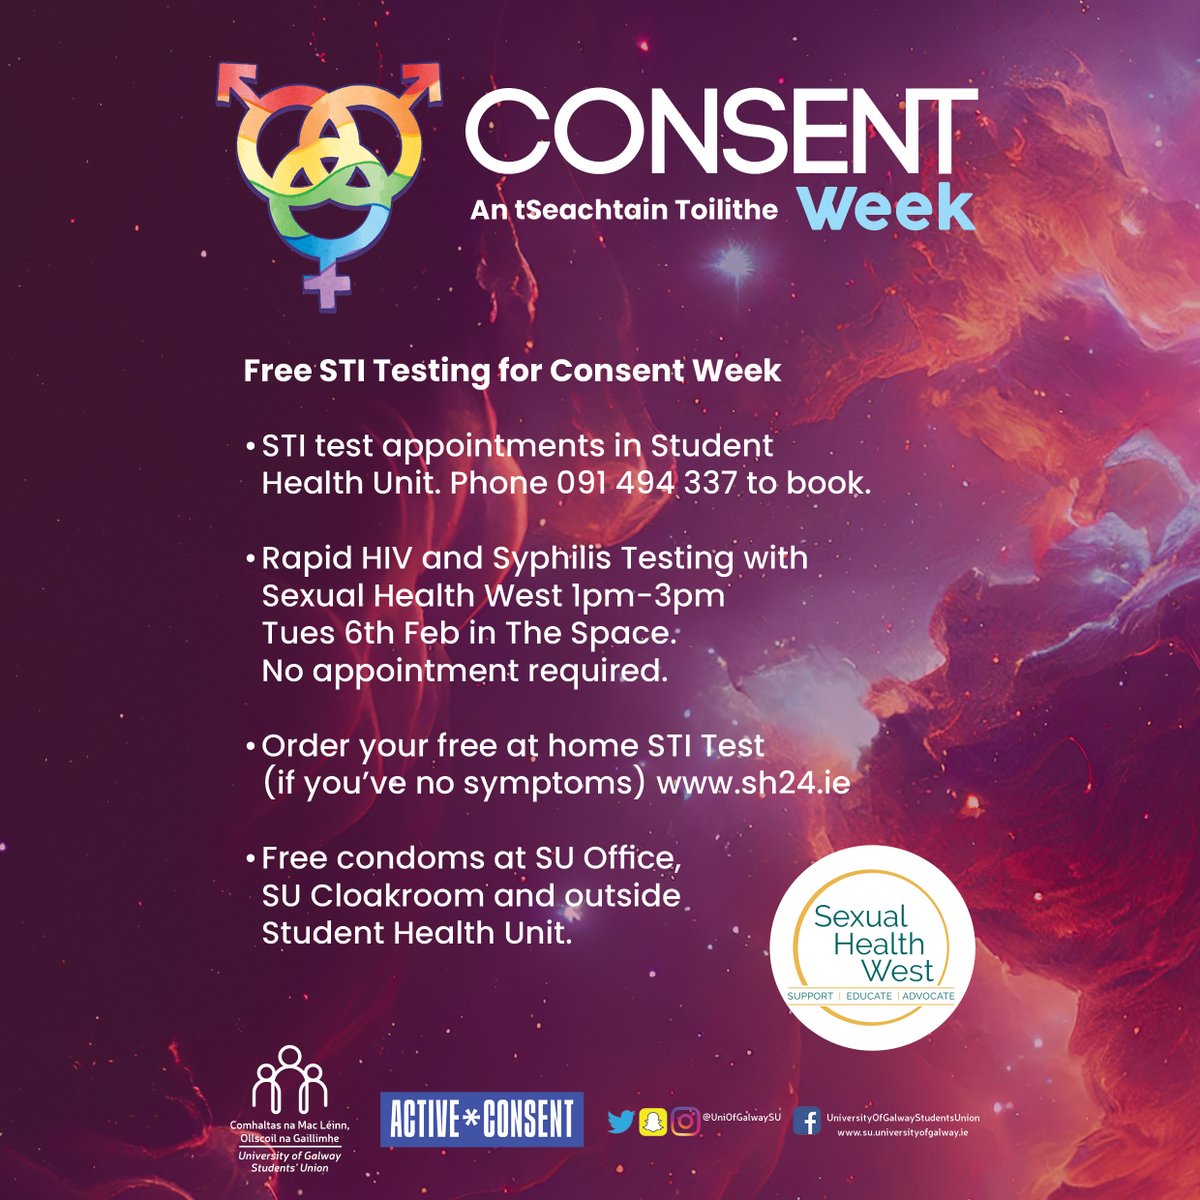 Free STI Testing for #ConsentWeek
✅STI test appointments Student Health Unit Phone 091 494 337 to book
✅Rapid HIV + Syphilis Testing with Sexual Health West 1pm-3pm Tues 6 Feb No appointment required
✅Order free at home STI Test (if you’ve no symptoms) sh24.ie